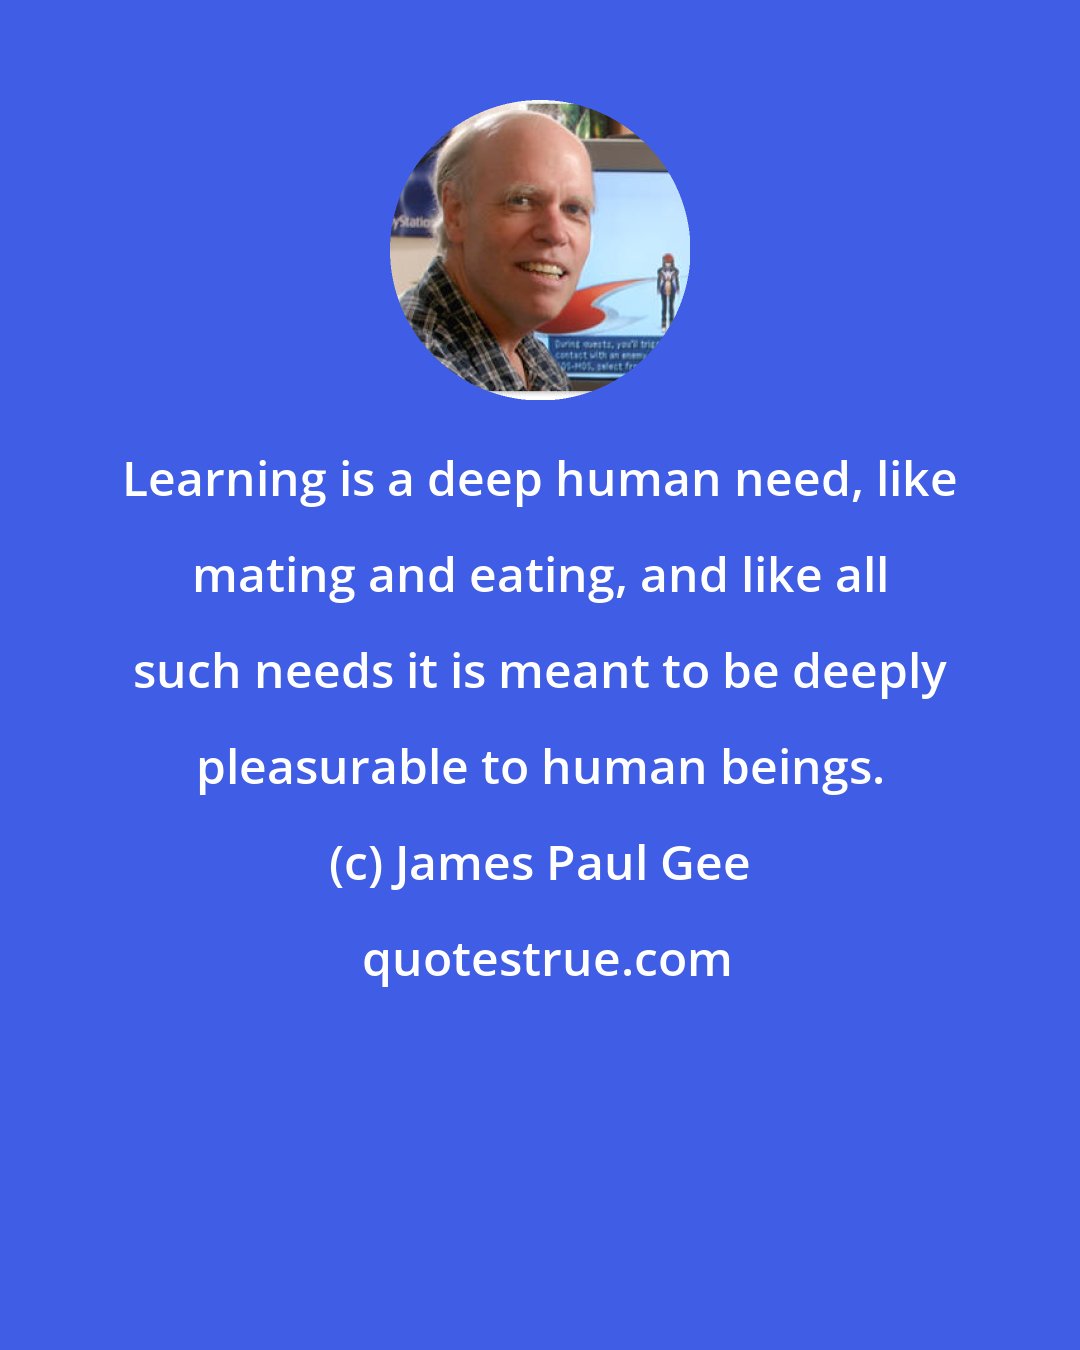 James Paul Gee: Learning is a deep human need, like mating and eating, and like all such needs it is meant to be deeply pleasurable to human beings.